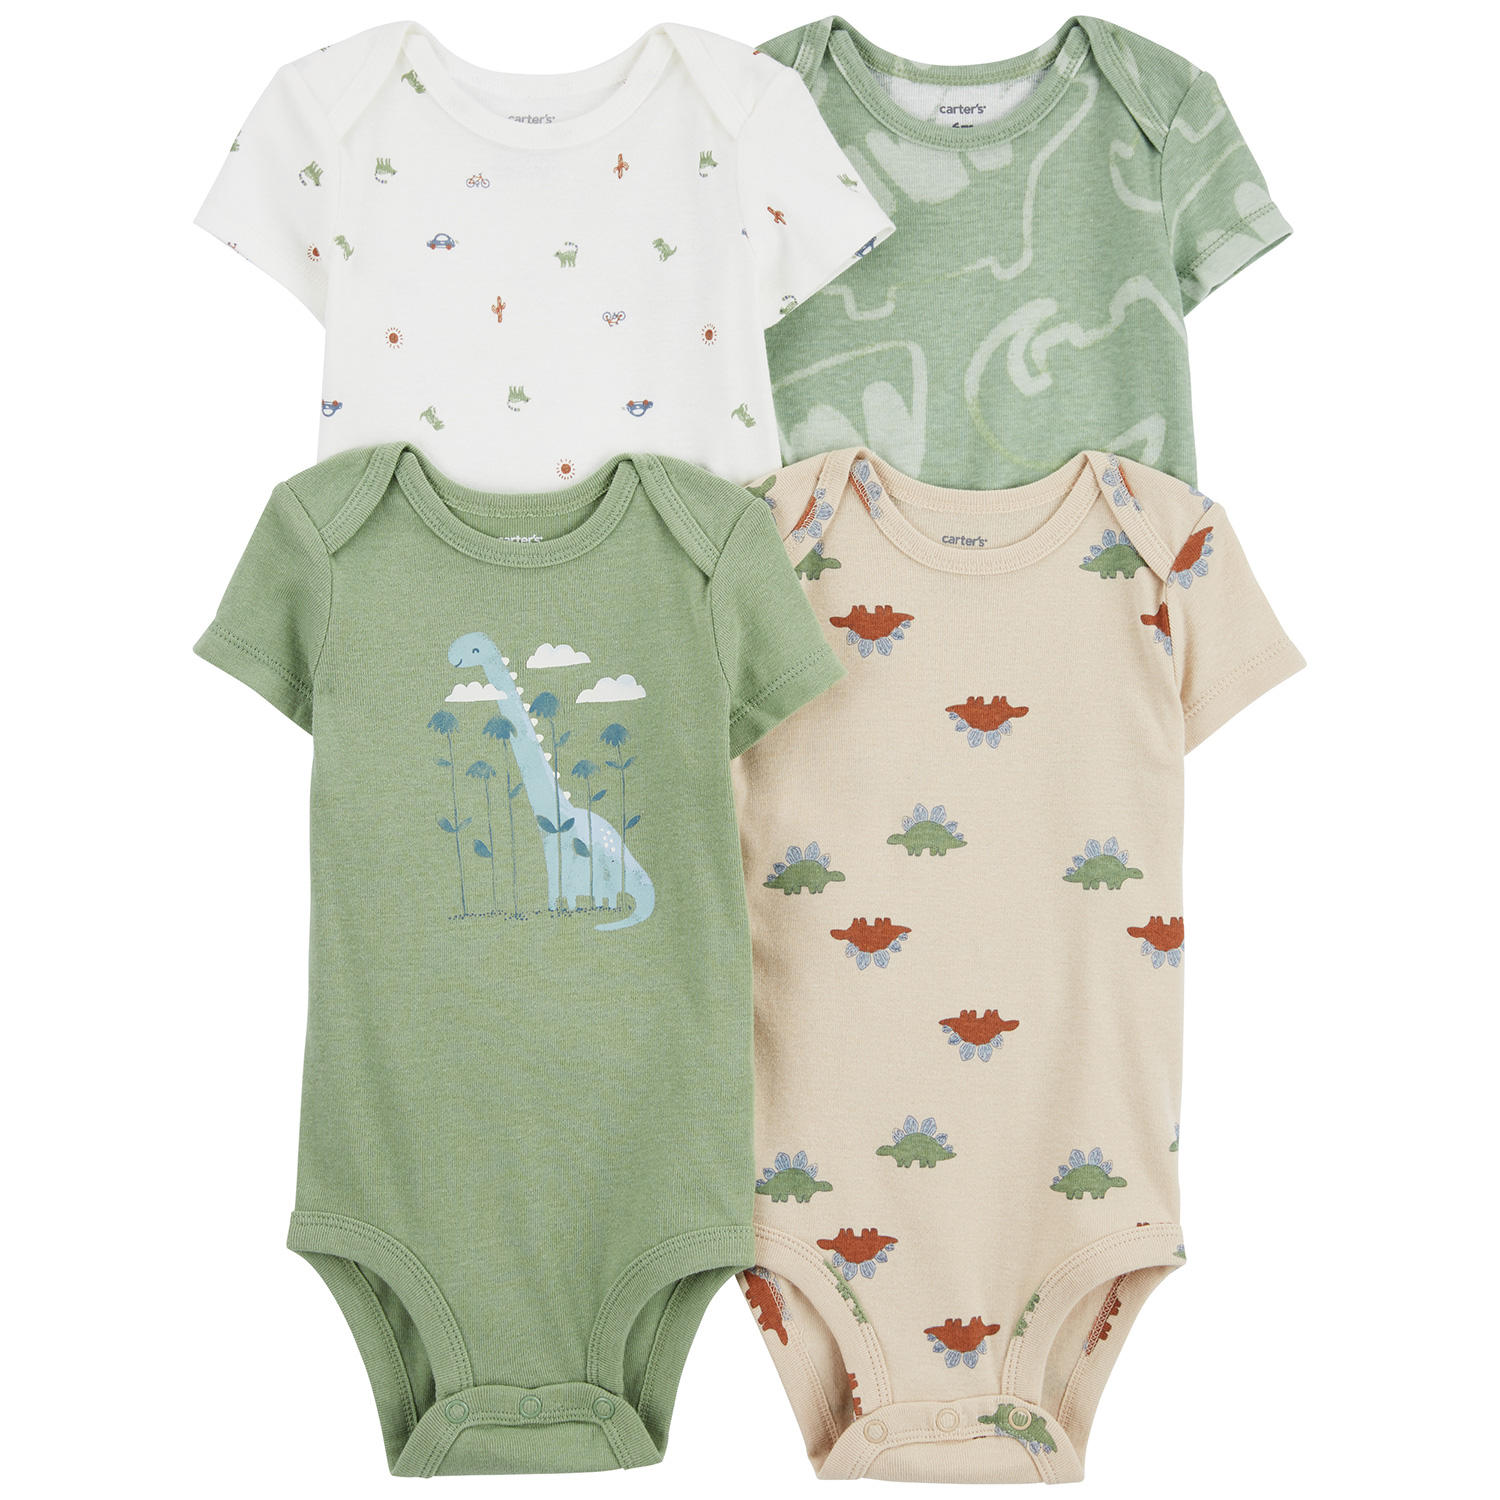 Sam's Club: 4-Count Carter's Baby Boys' or Girls' Short-Sleeve Bodysuits (Various) $11 ($2.75 EA) + Free Shipping w/ Plus Members